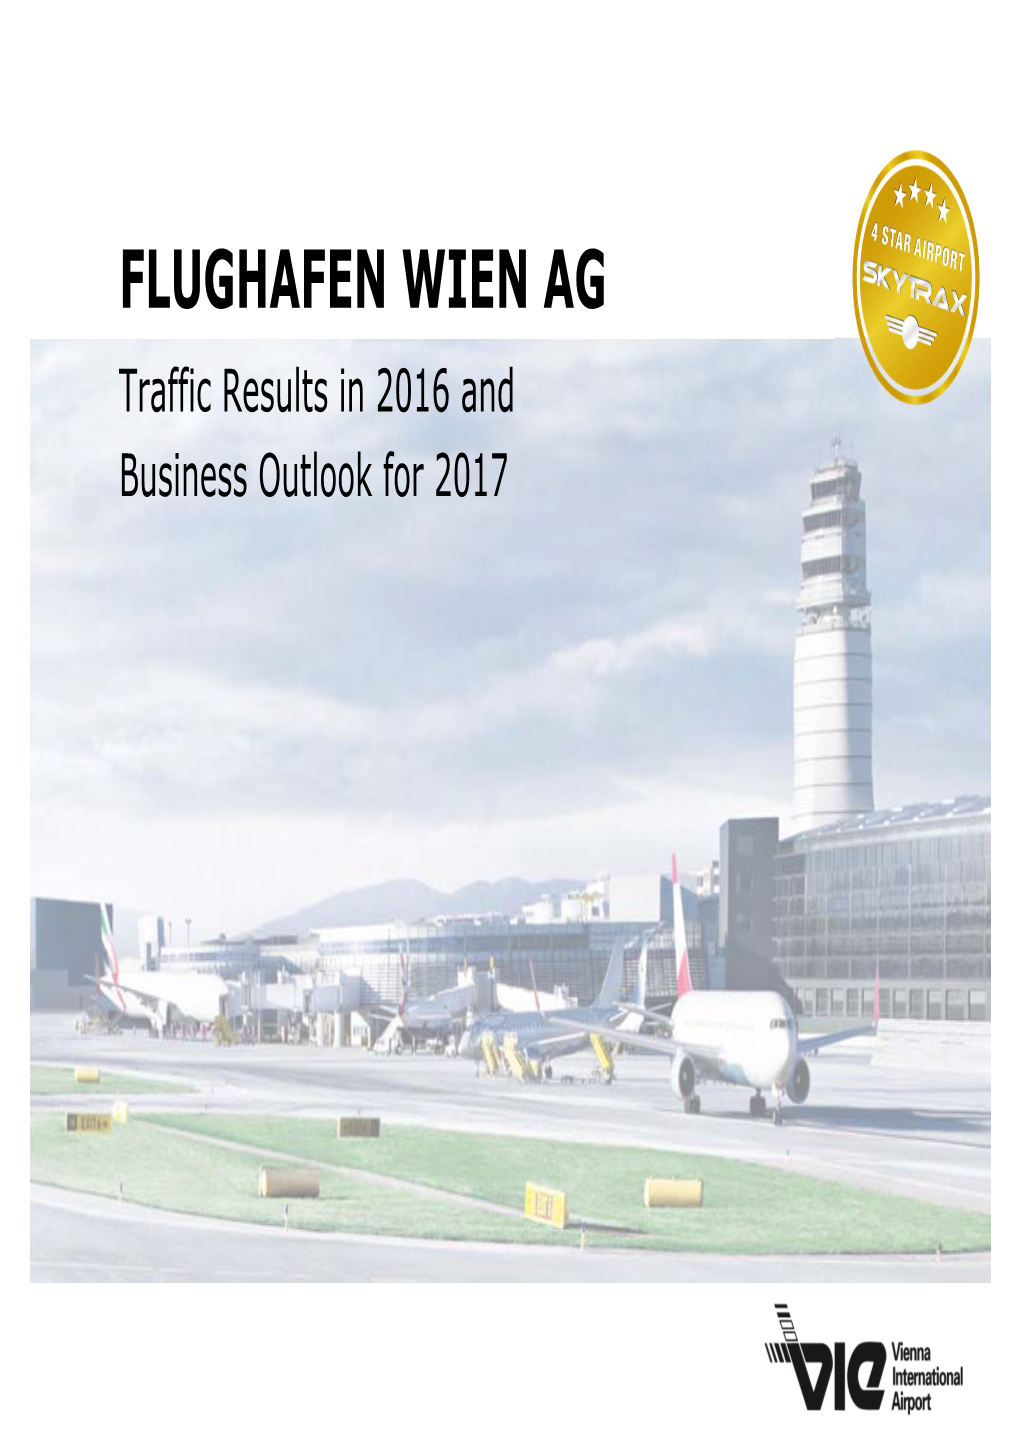 FLUGHAFEN WIEN AG Traffic Results in 2016 and Business Outlook for 2017 2016: Three Records Set in One Year